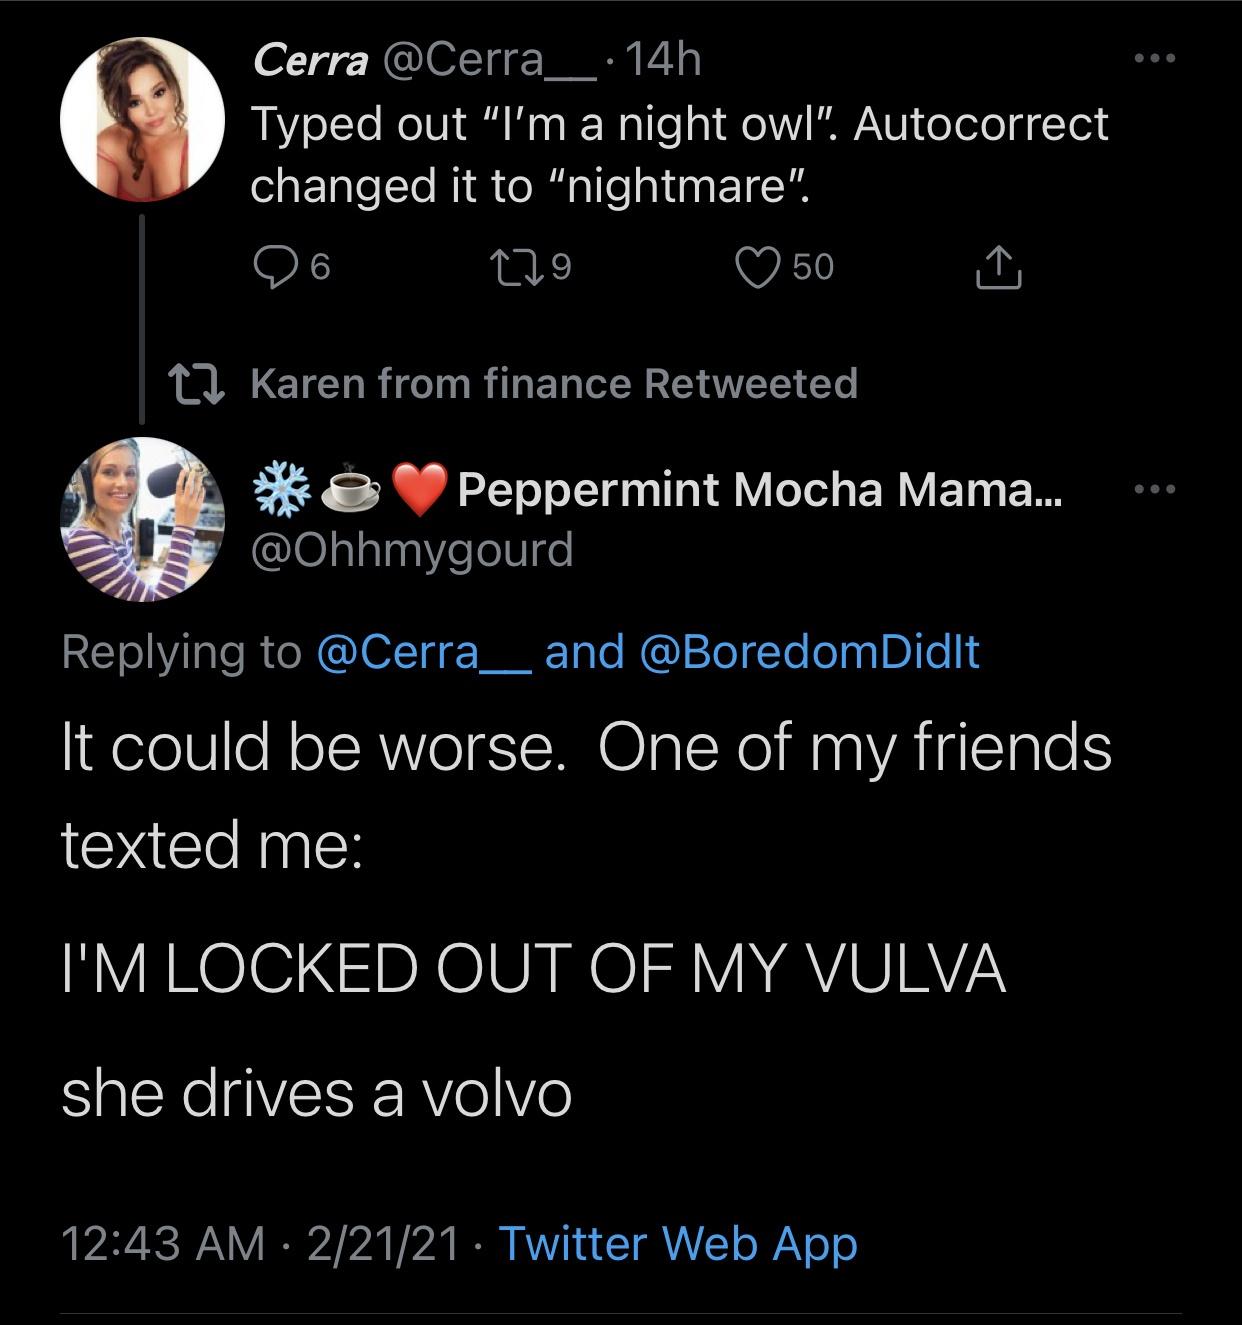 screenshot - Cerra 14h Typed out "I'm a night owl". Autocorrect changed it to "nightmare". 6 129 50 12 Karen from finance Retweeted & Peppermint Mocha Mama... and It could be worse. One of my friends texted me I'M Locked Out Of My Vulva she drives a volvo